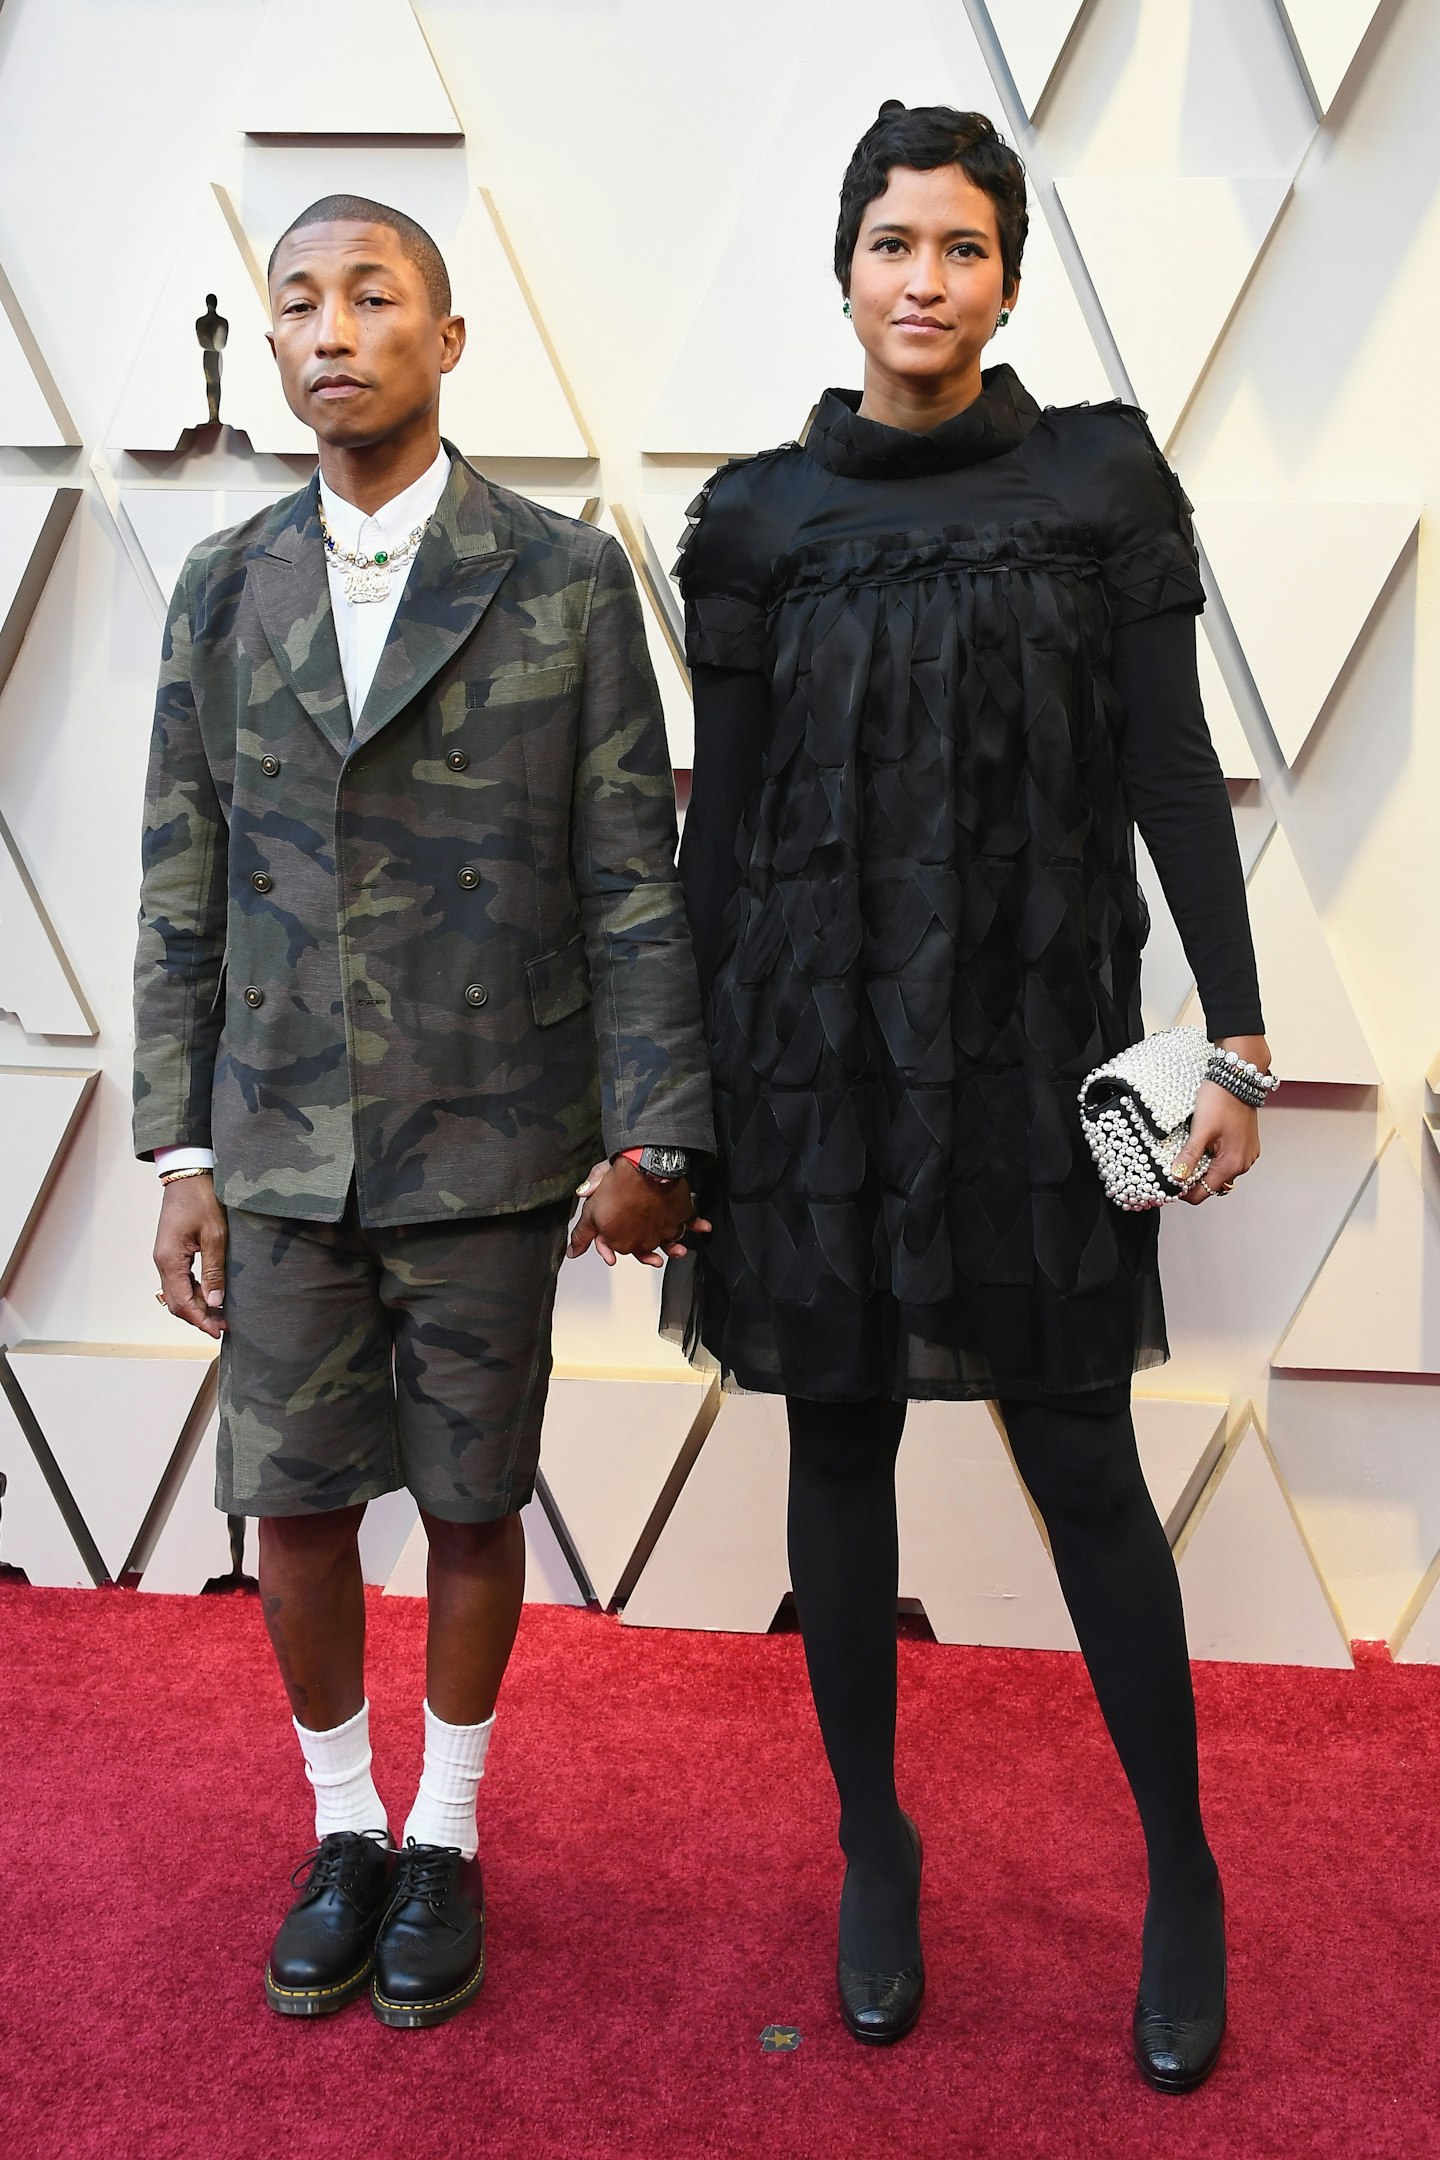 Pharrell Williams and Helen Lasichanh at the 2019 Oscars